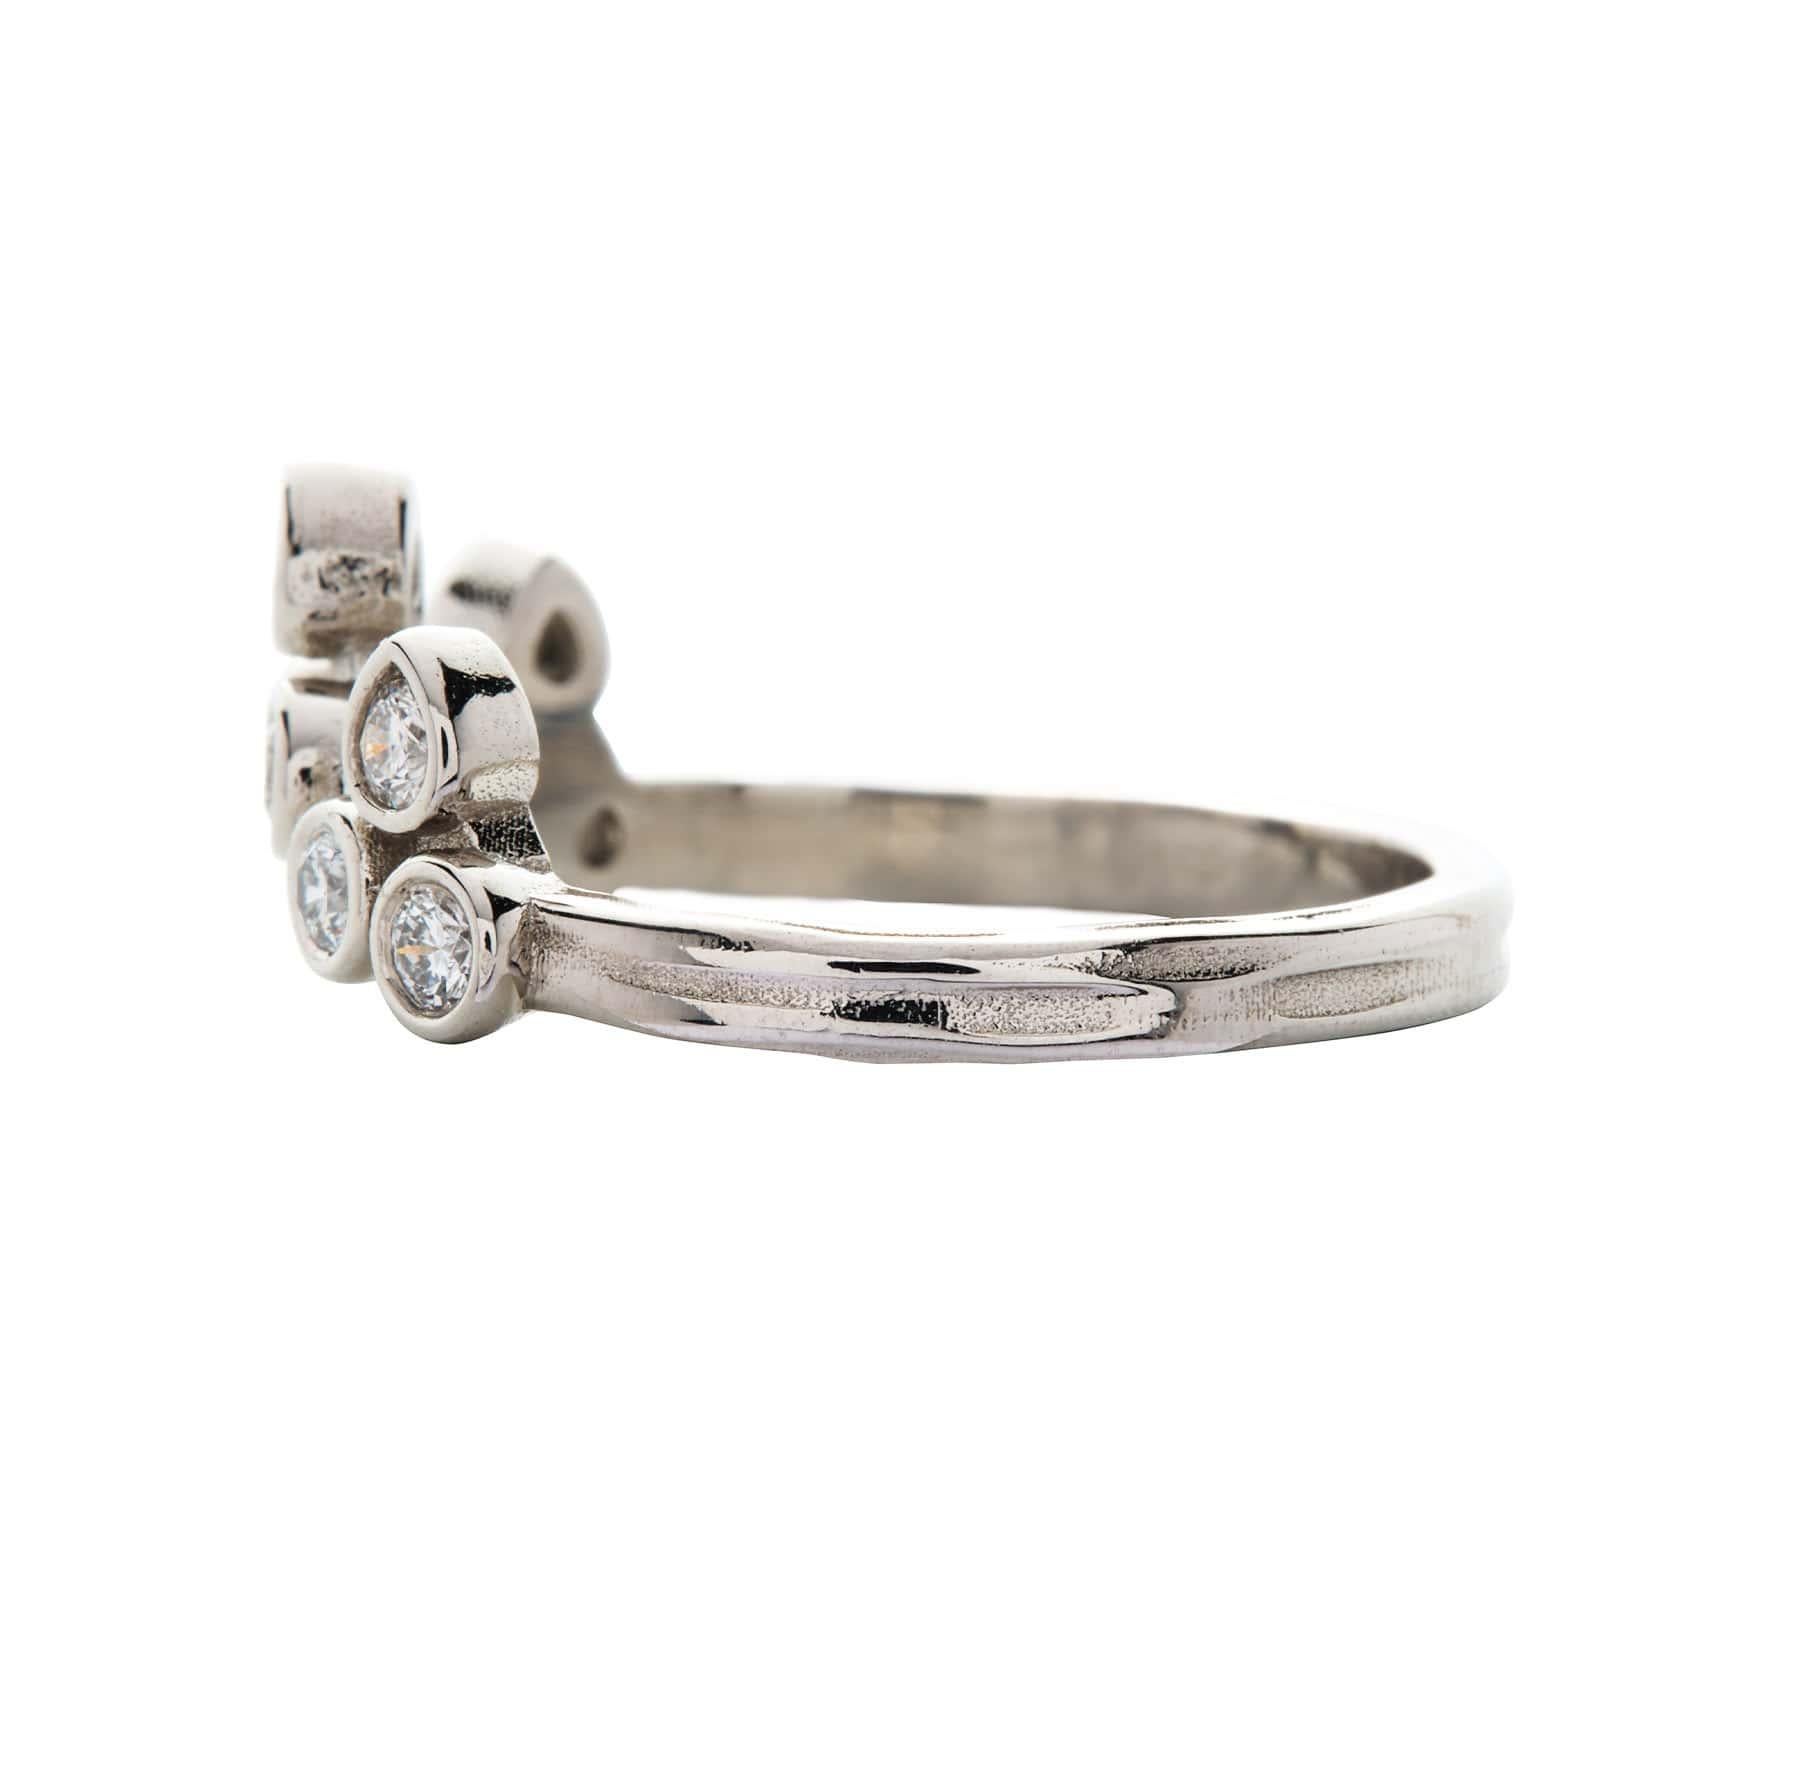 Nine 2.2mm round brilliant cut diamonds set in platinum bezel settings dot the finger in the shape of a tiara. The top 3 settings are pear-shaped, with their points turned out. With its graceful curve, this power ring can be worn in either direction